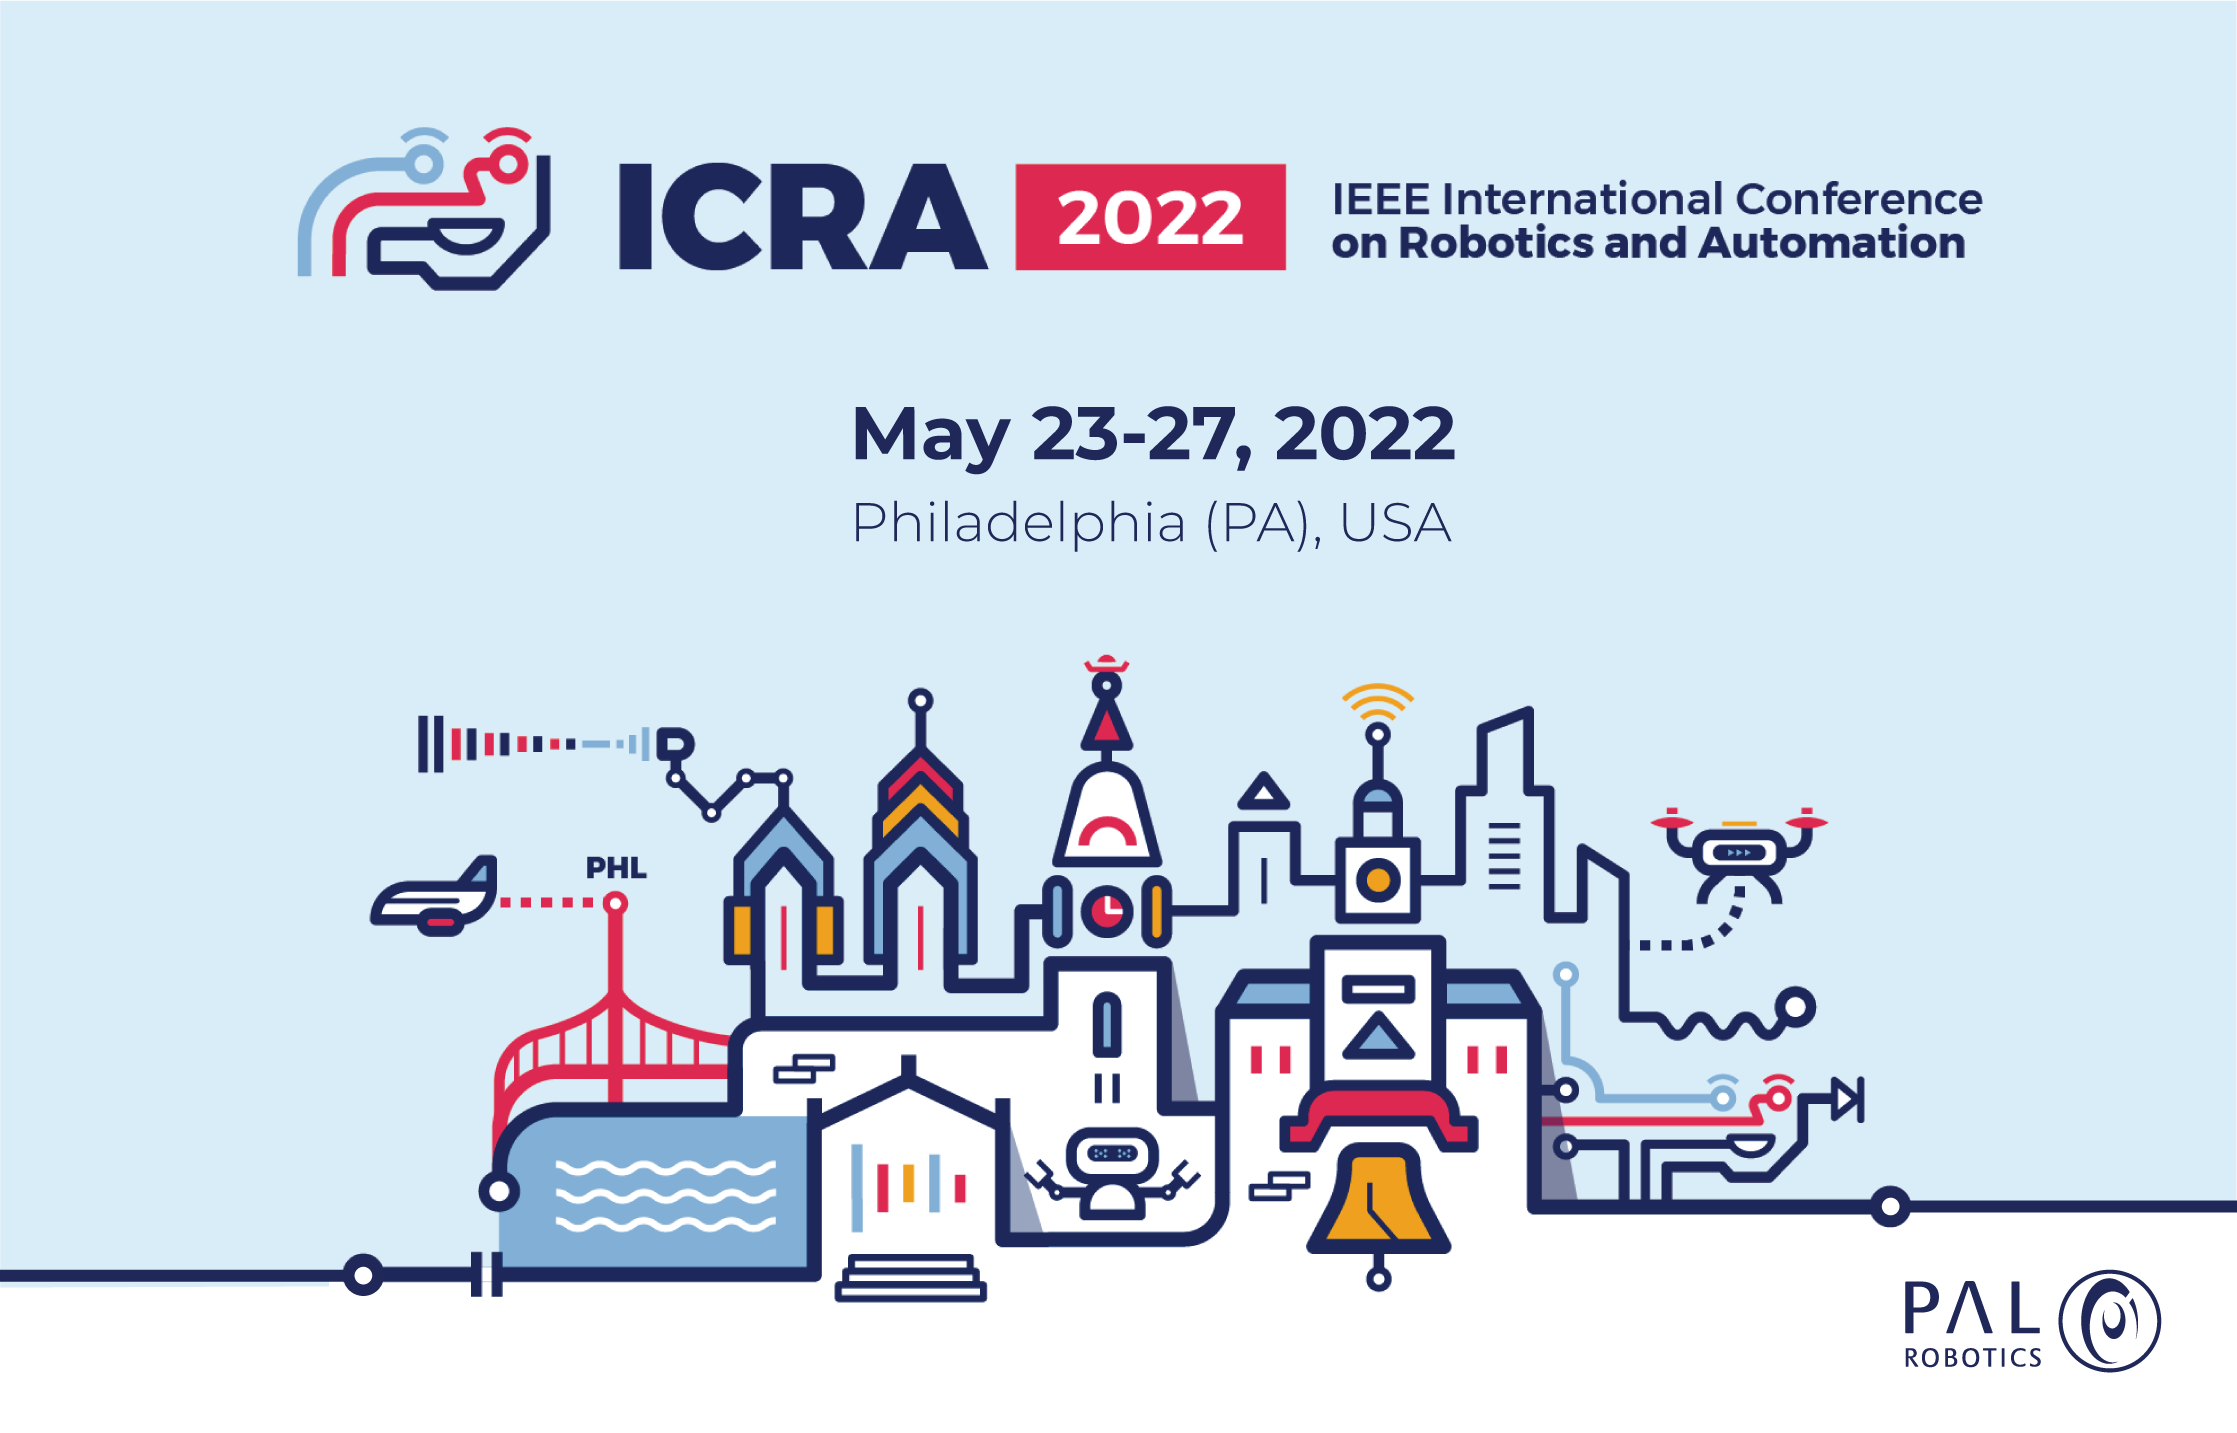 visual of the ICRA 2022 event, that icnlude the skyline of Philadelphia and PAL Robotics logo